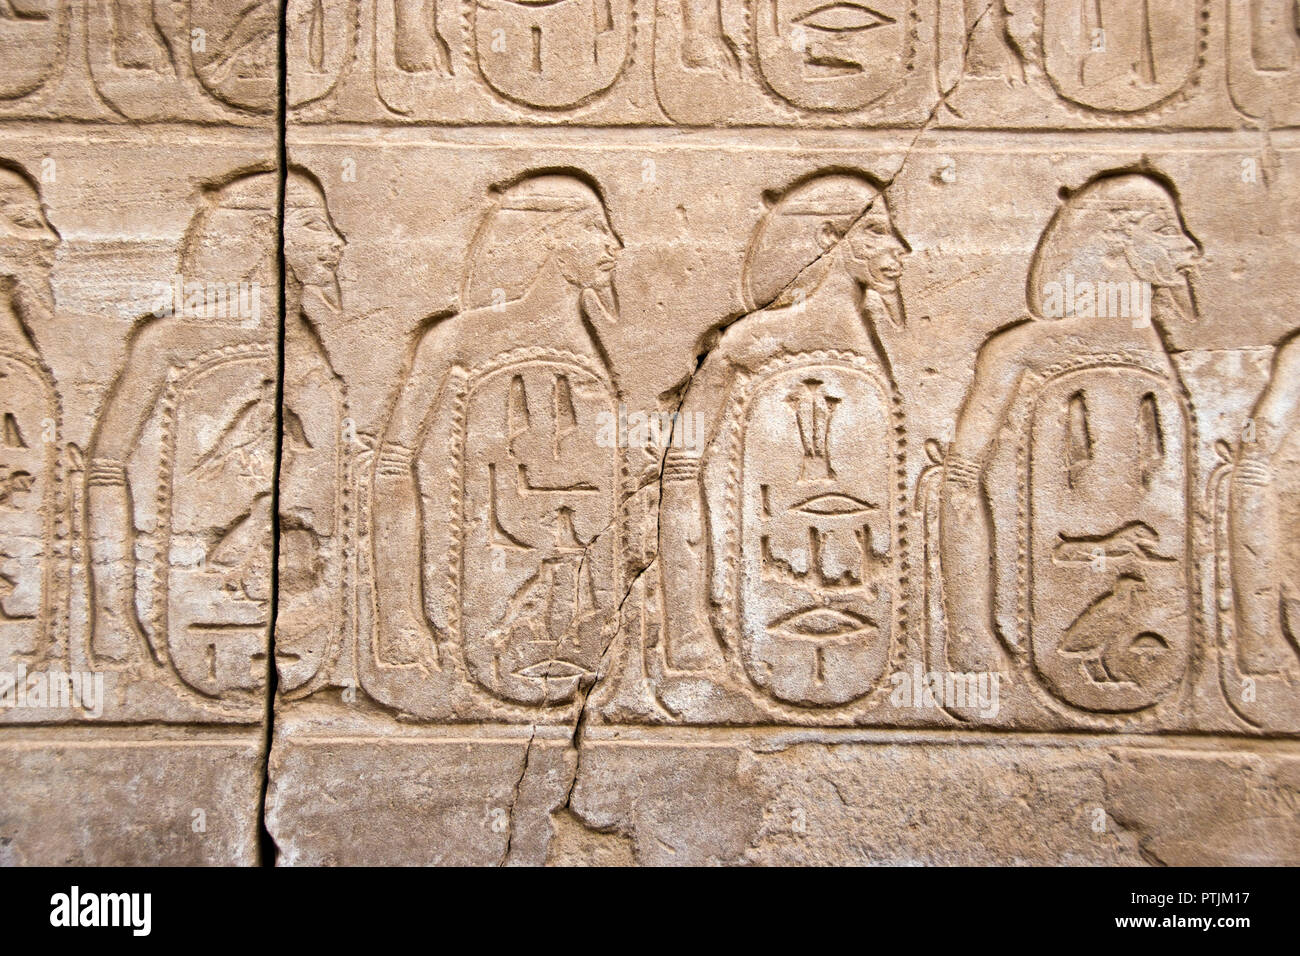 A bas-relief carving of prisoners of war tied together at Karnak Temple, Luxor, Egypt. Stock Photo